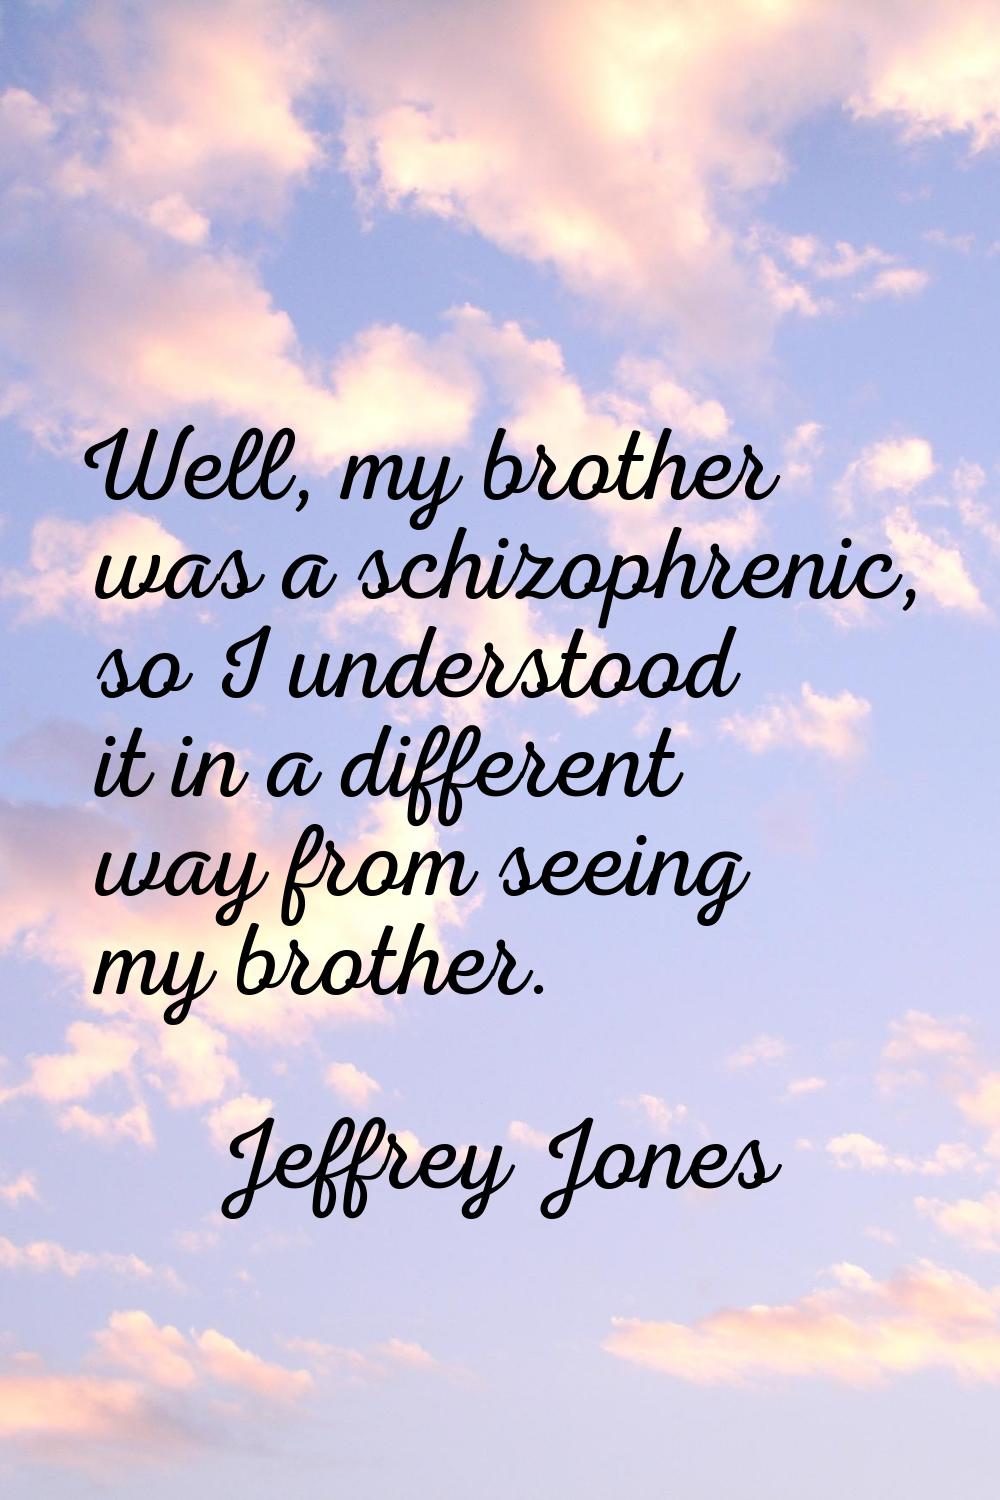 Well, my brother was a schizophrenic, so I understood it in a different way from seeing my brother.